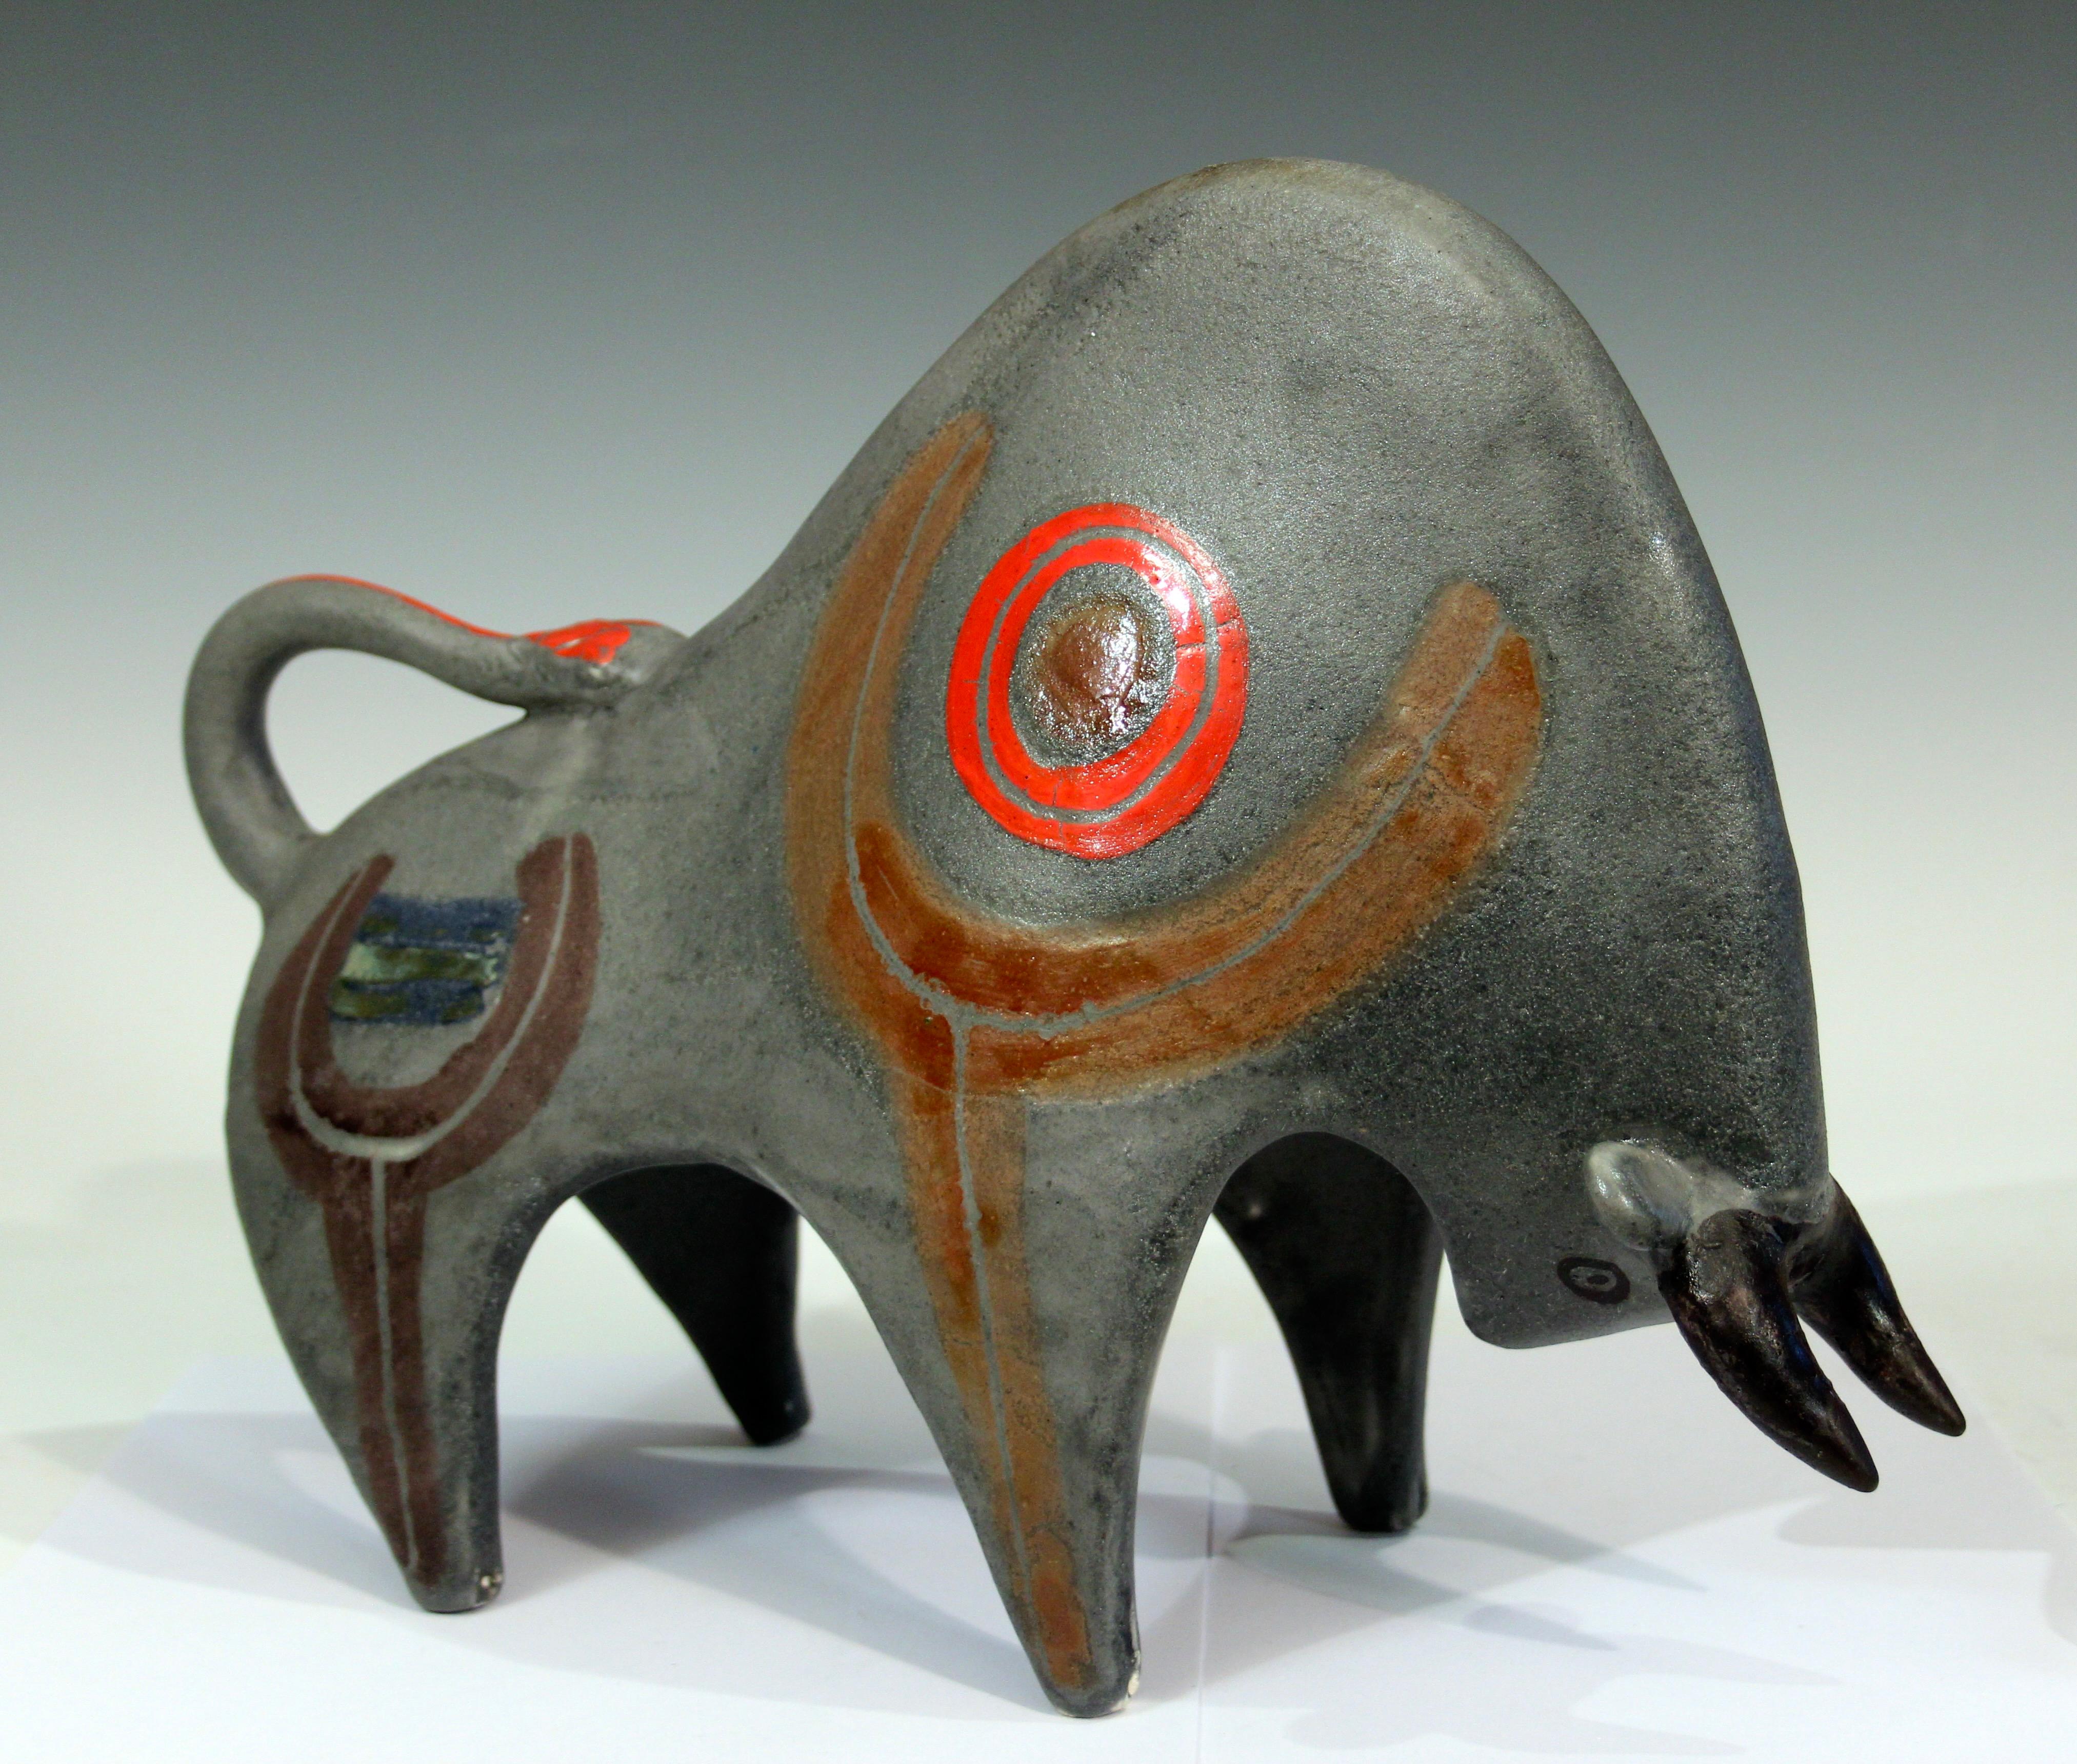 Large vintage Bruno Gambone pottery bull figure in partially abstracted form with repetitive sweeping curves and enameled totemic symbols on a variegated gray ground, circa 1970's. 13 1/2